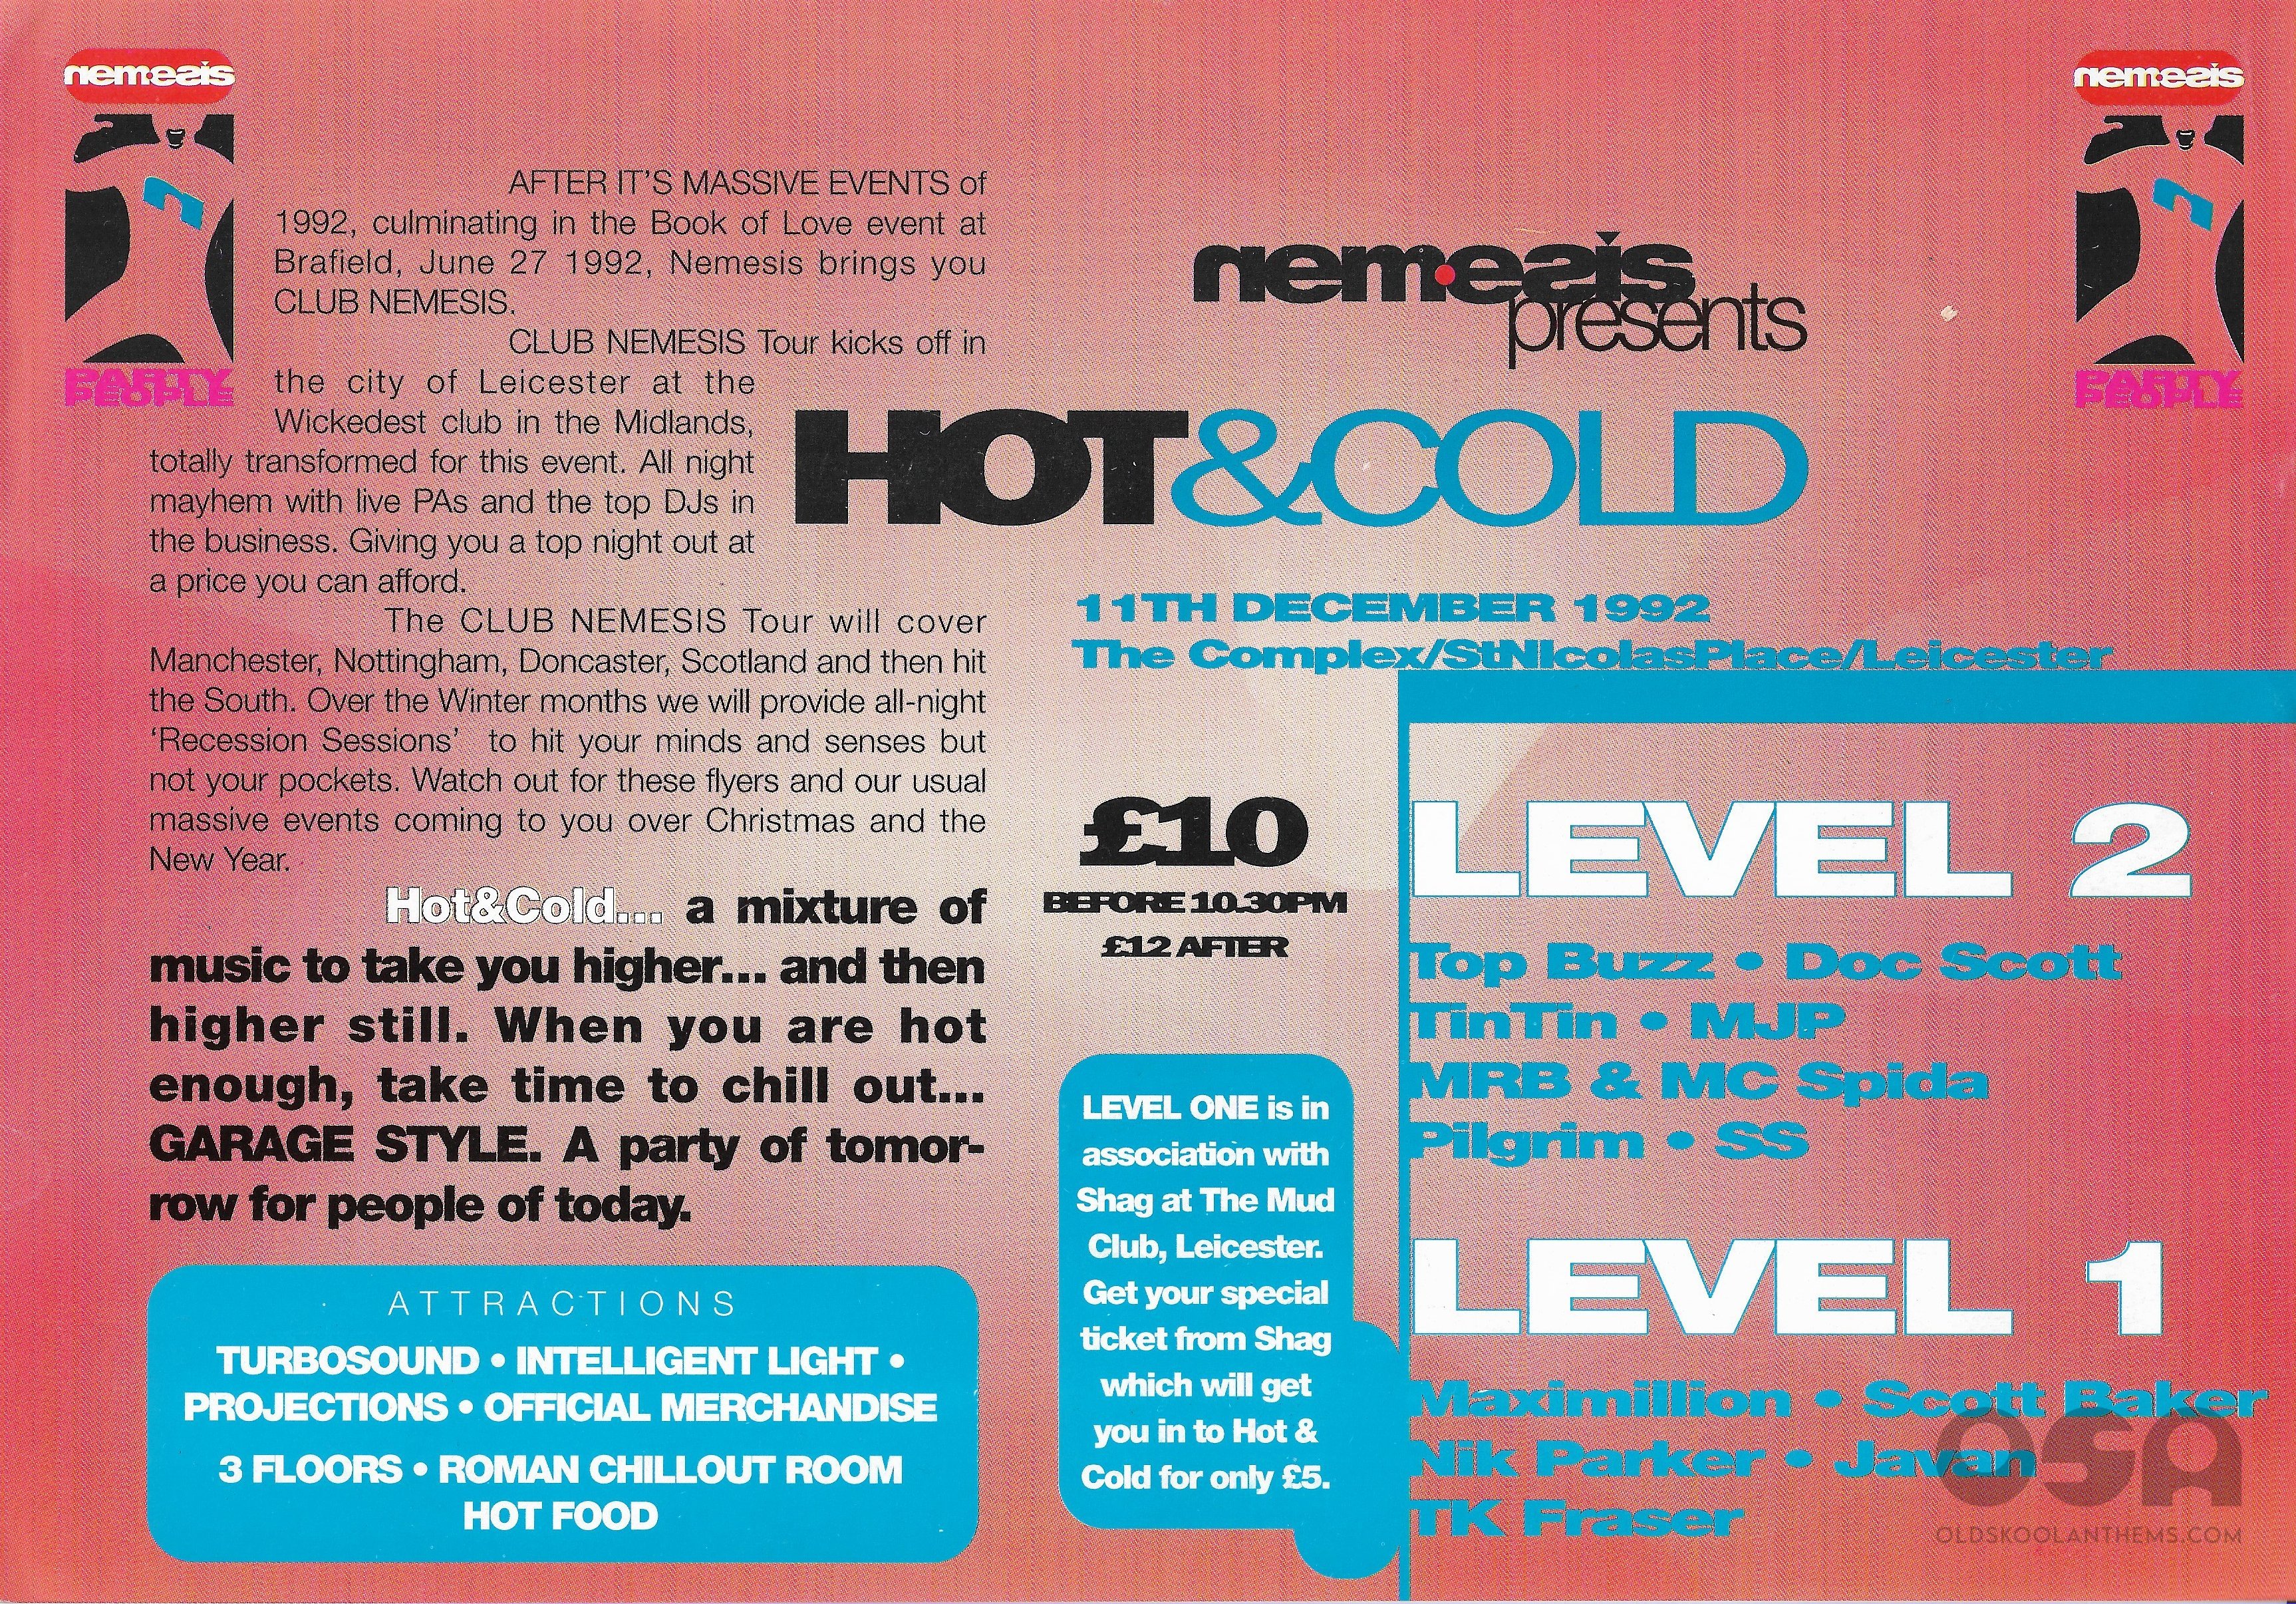 Nemesis - Hot & Cold @ The Complex Leicester - 11th December 1992 - B .jpg